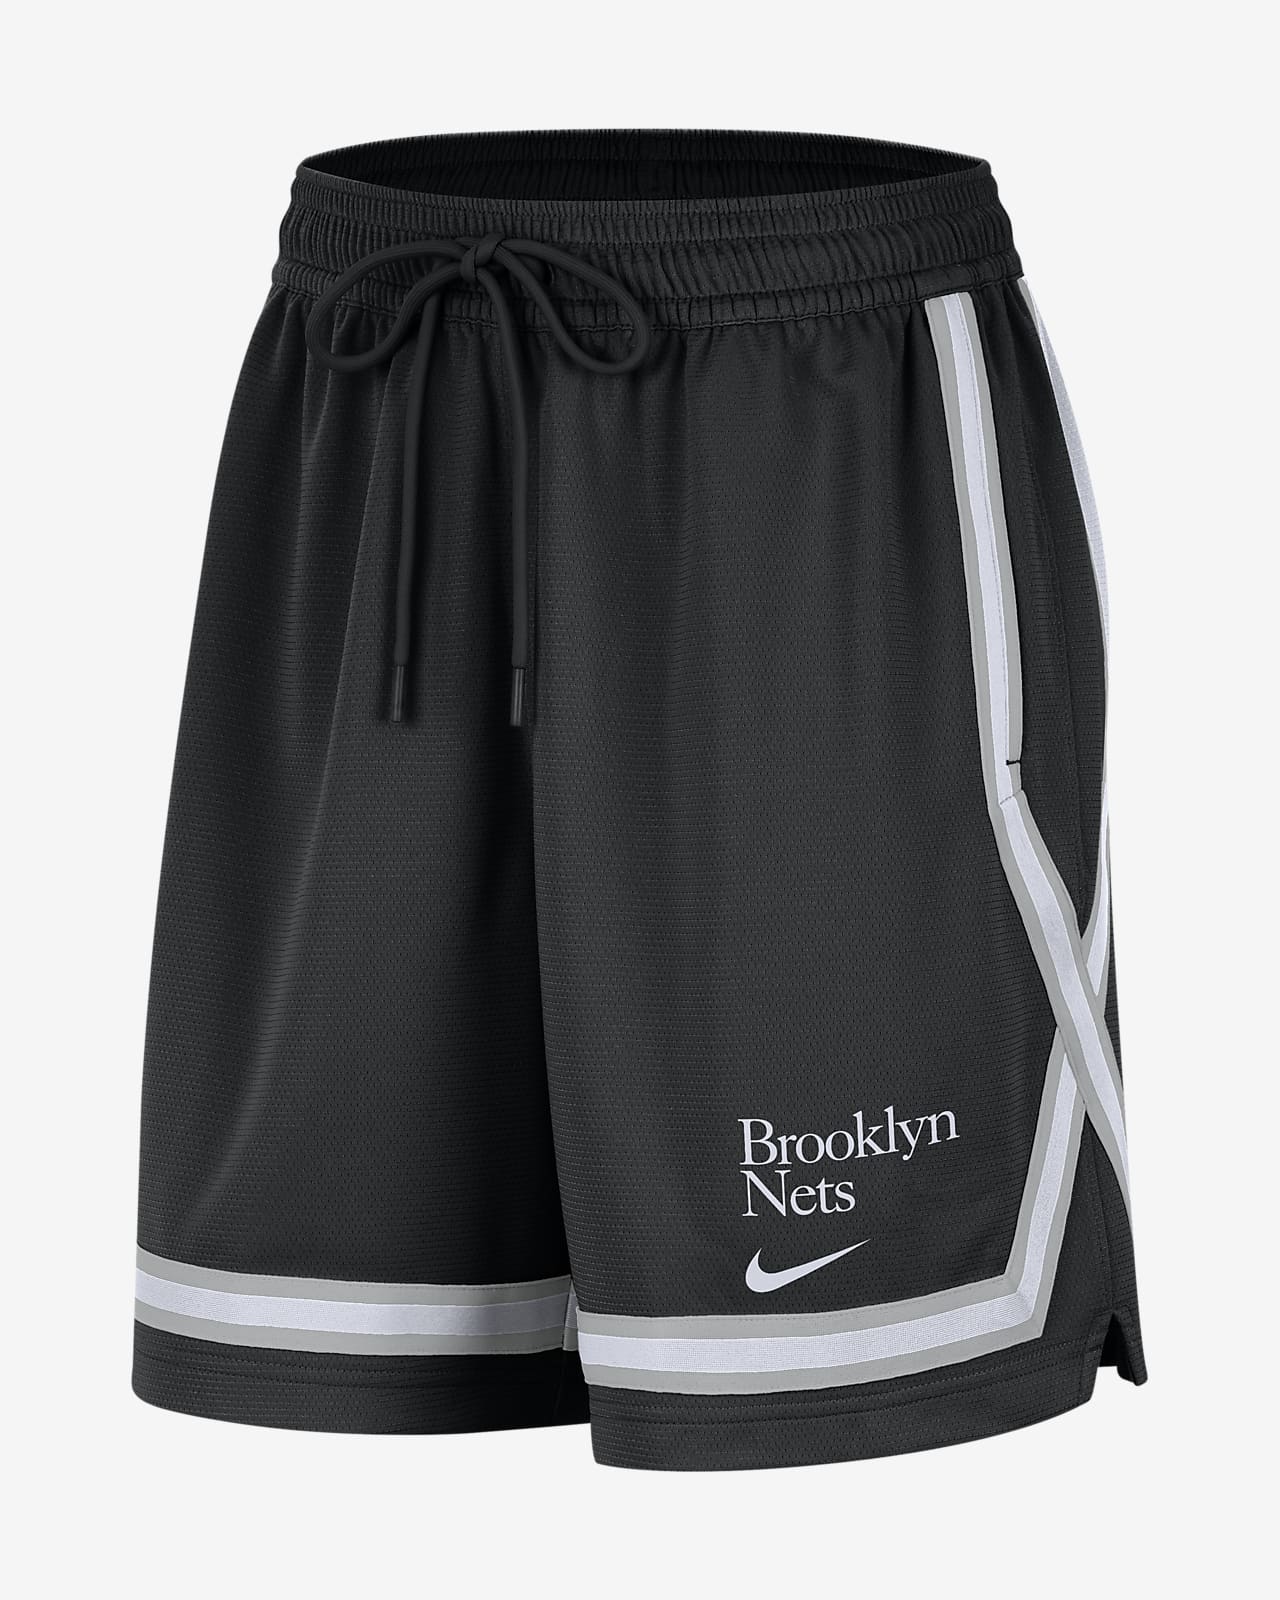 Brooklyn Nets Fly Crossover Women's Nike Dri-FIT NBA Basketball Graphic Shorts